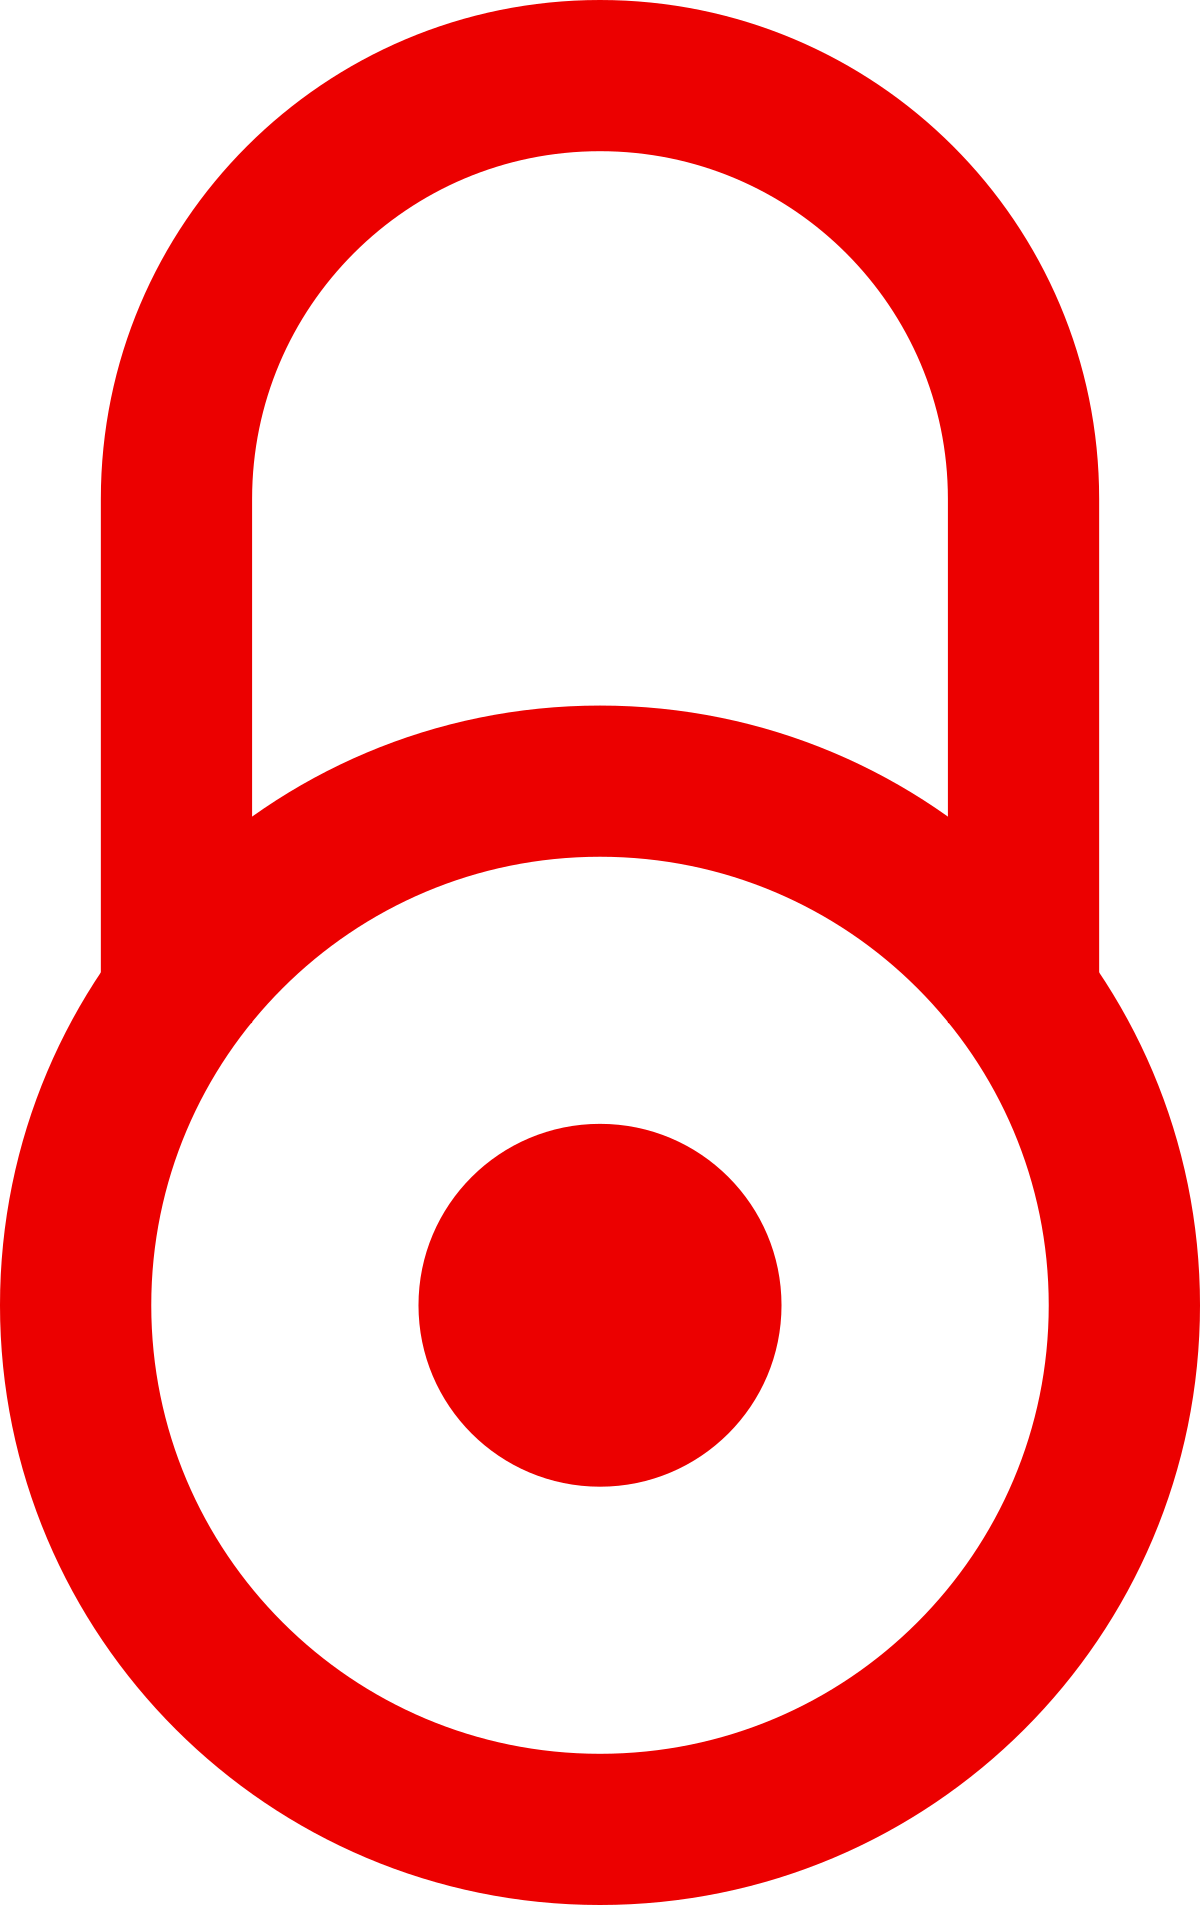 A lock symbol with a red X over it.